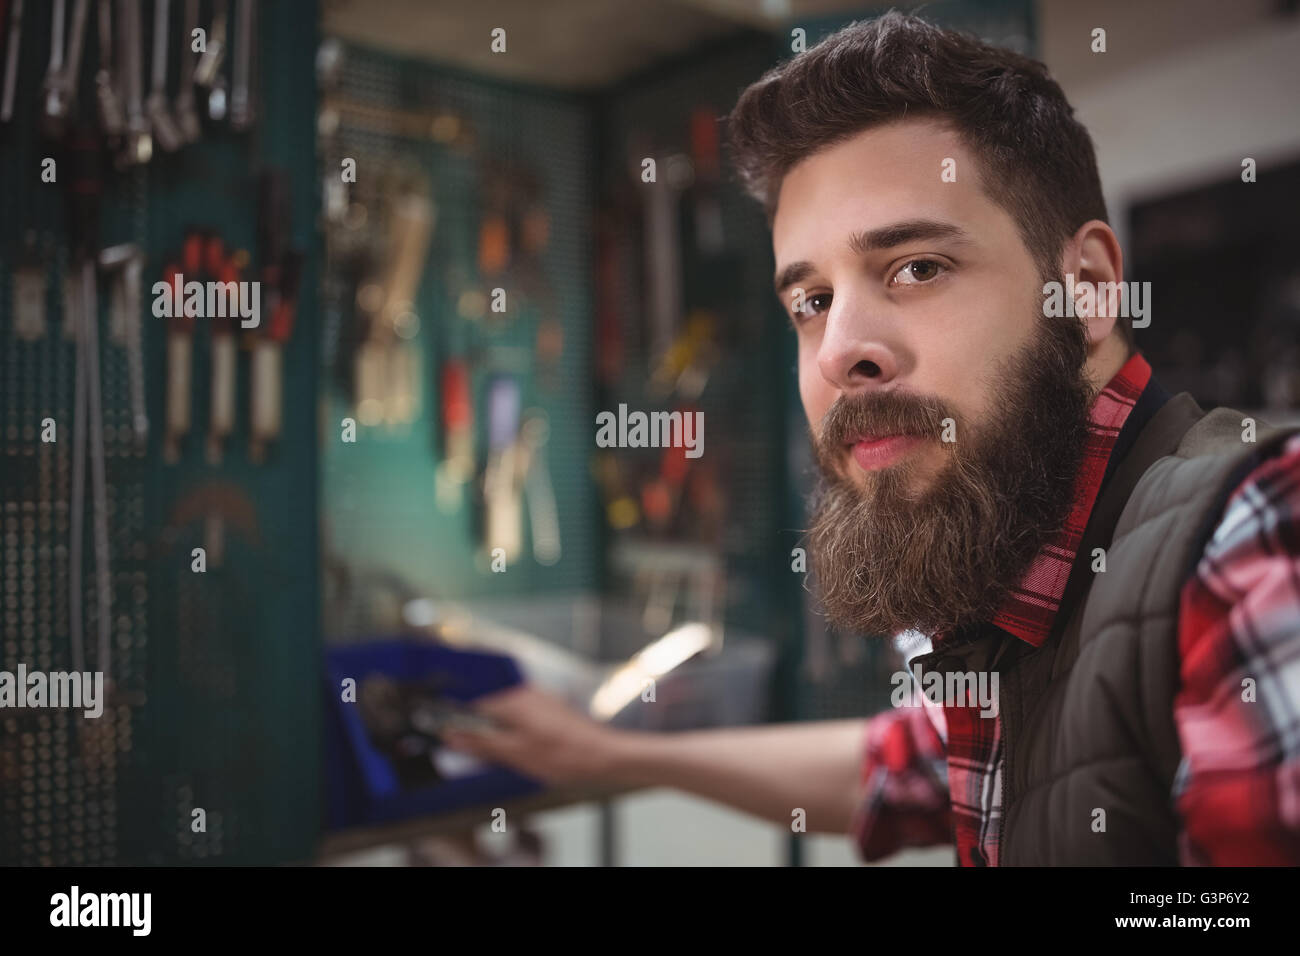 Portrait of mechanic searching a tool Stock Photo